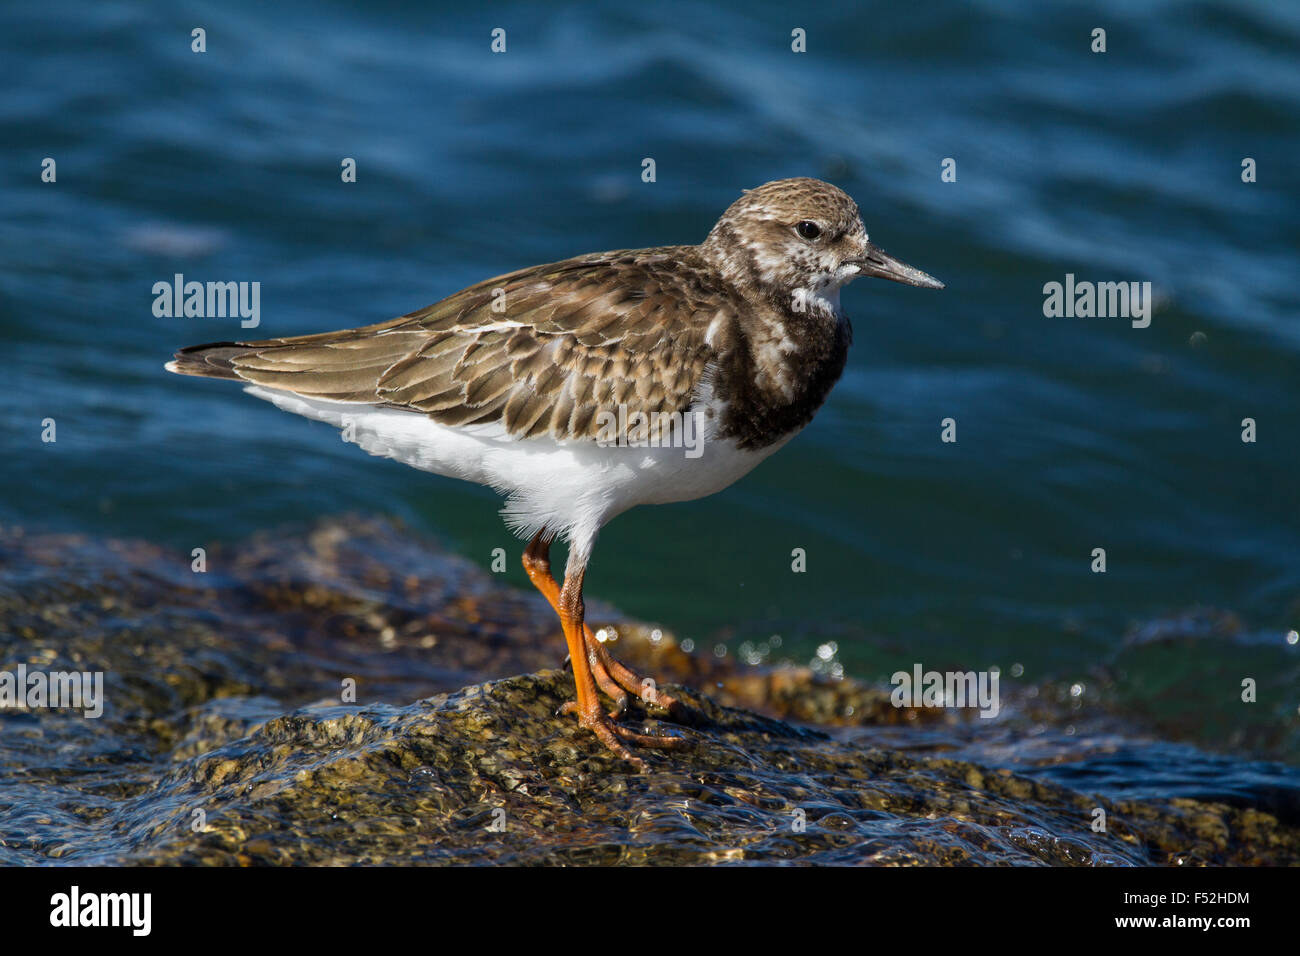 A ruddy turnstone perched on the rocks. Stock Photo